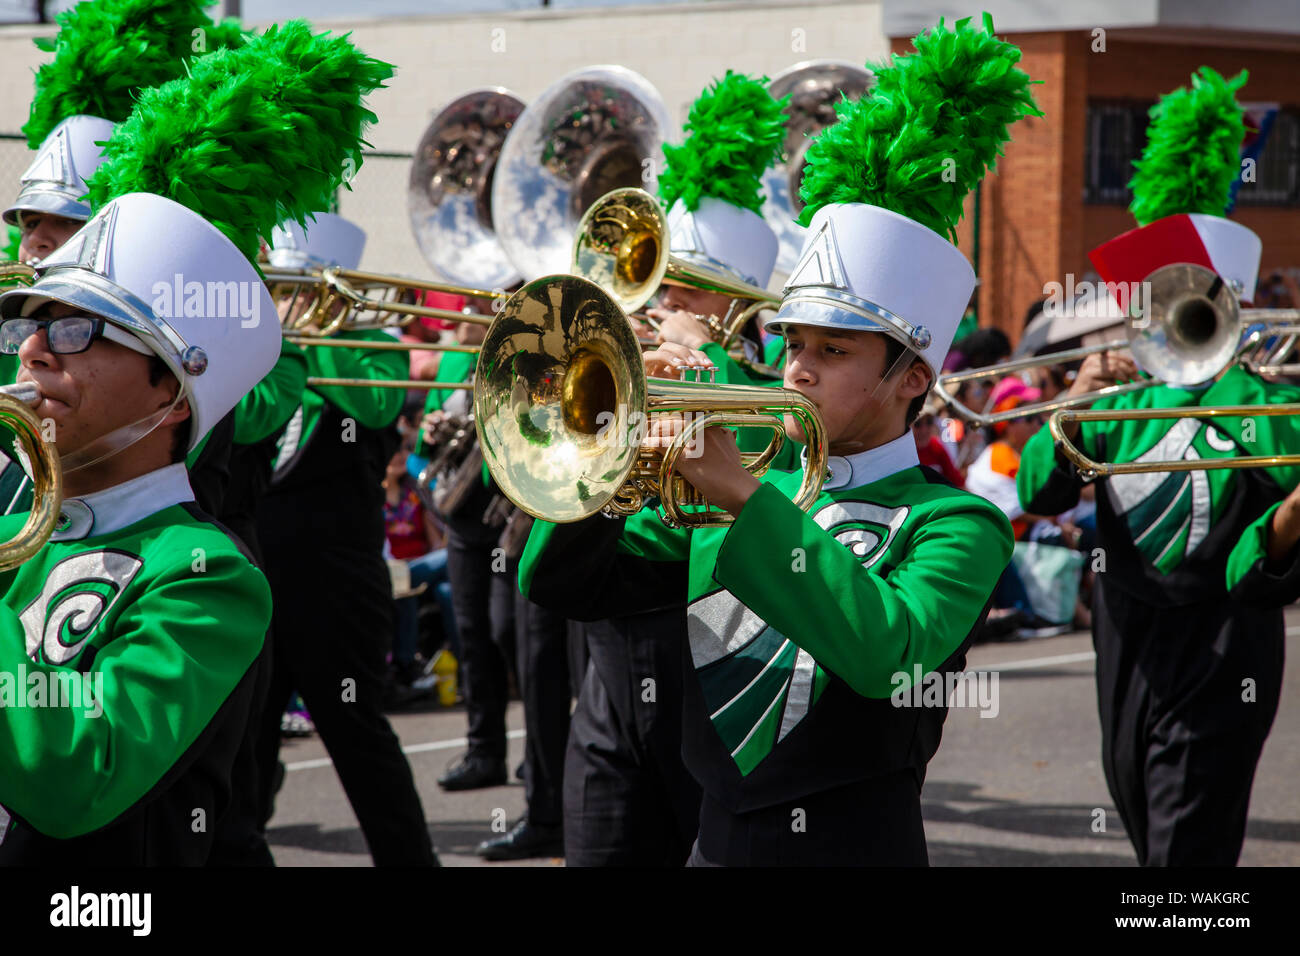 Charro Days Festival in Brownsville, Texas. (Editorial Use Only) Stock Photo